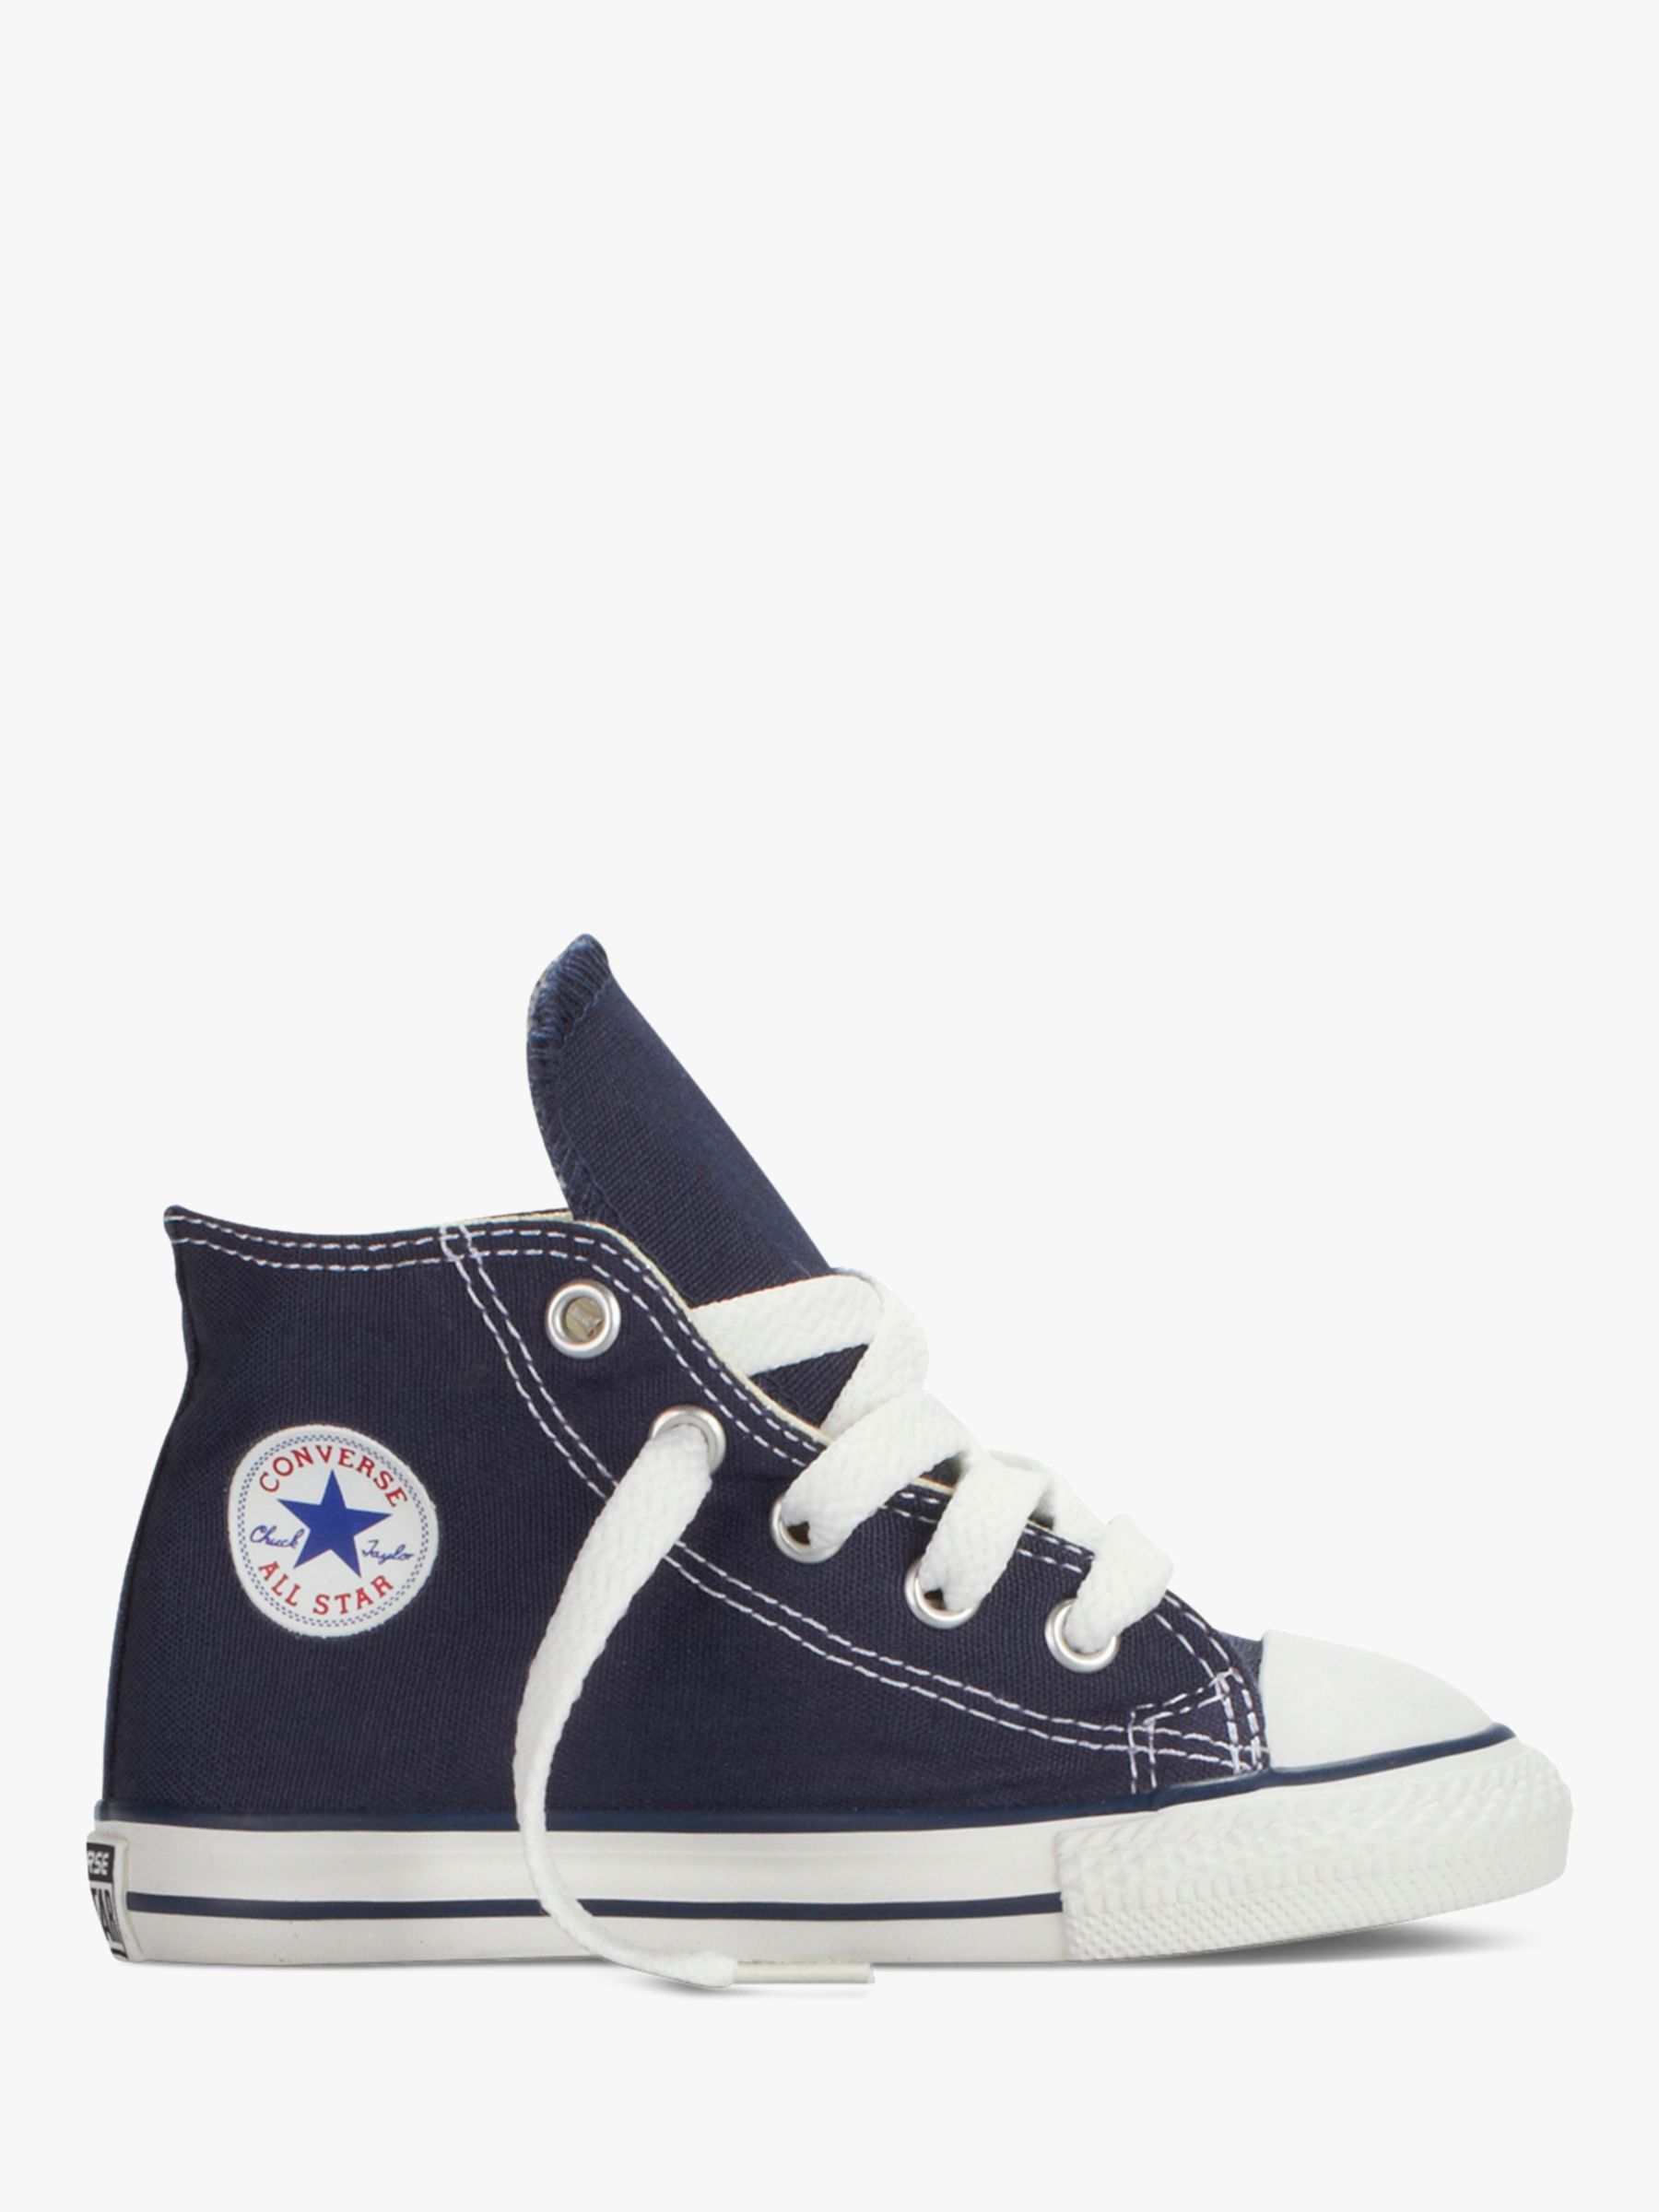 Converse All Star Core-Hi Trainers, Navy, Size 12 Junior